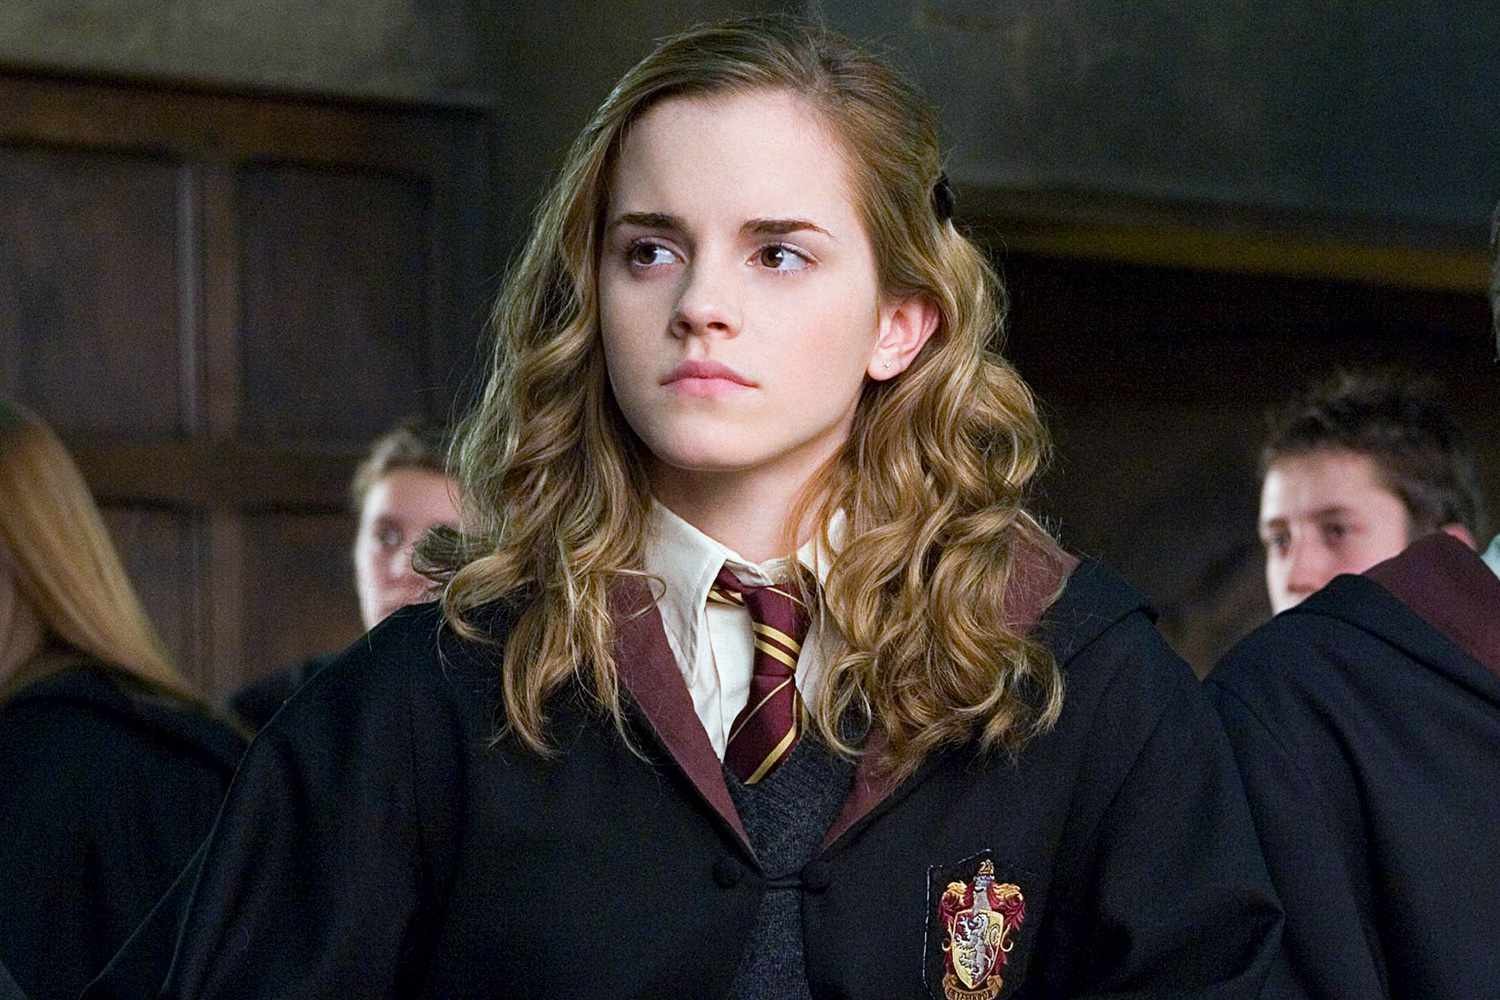 Emma Watson as Hermione Granger from the Harry Potter franchise